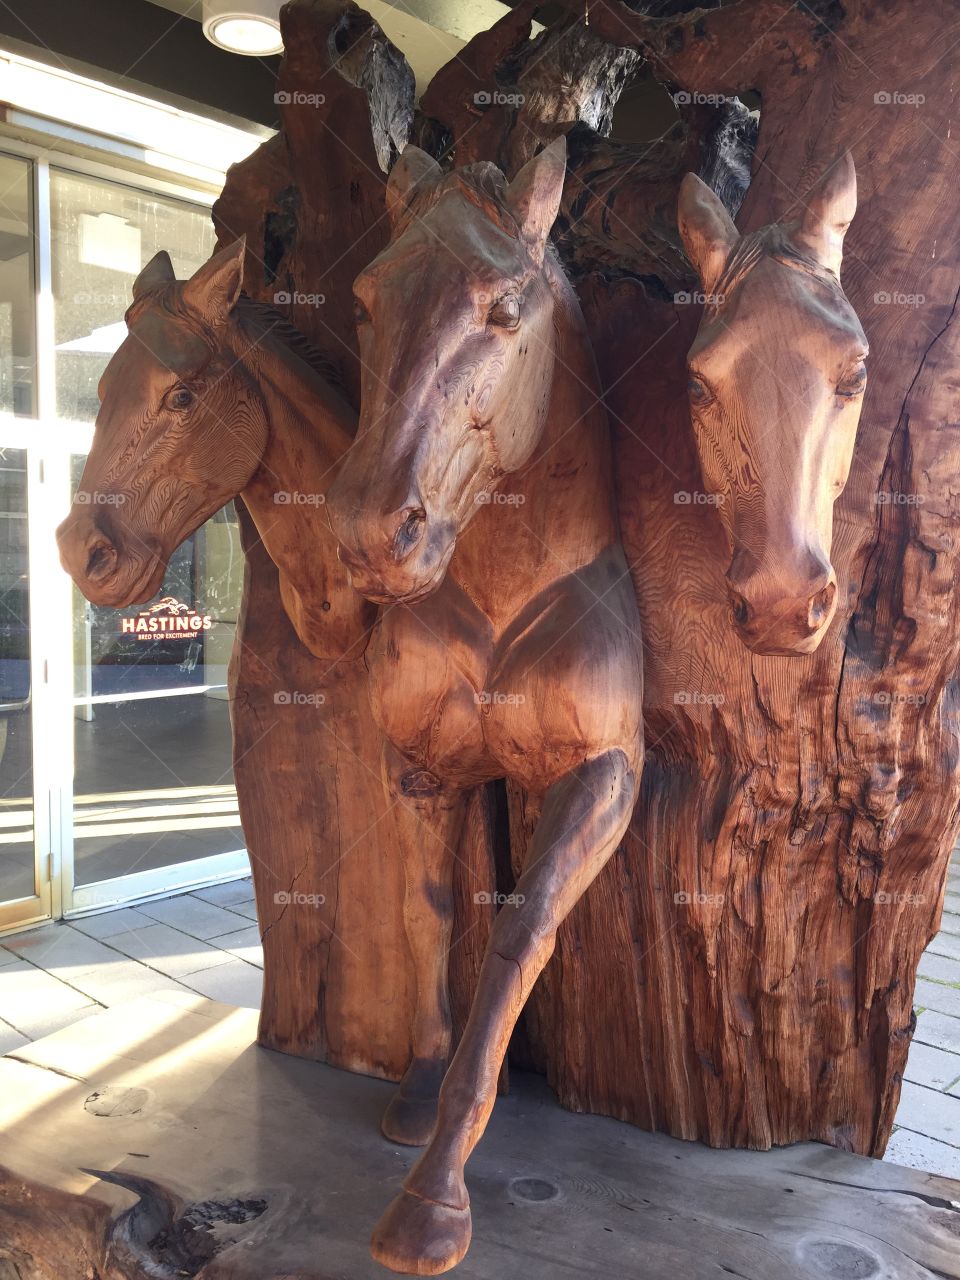 Carved wooden race horses